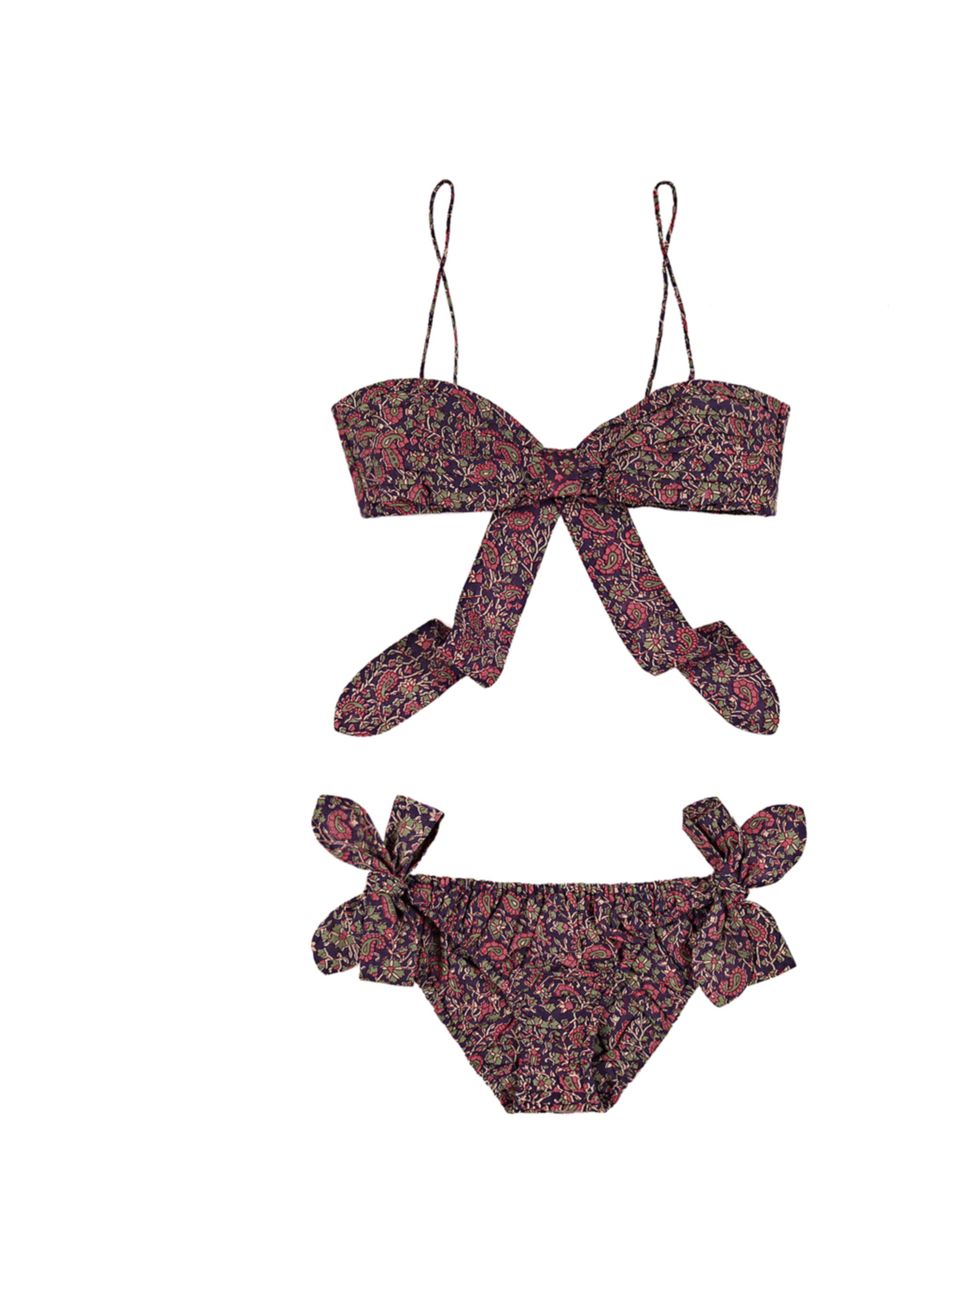 <p>If youre in need of an excuse to get away, then make this bikini it Laurence Dolige [rinted bikini, £70, at <a href="http://www.vestiairecollective.com/">Vestiaire Collective</a></p>